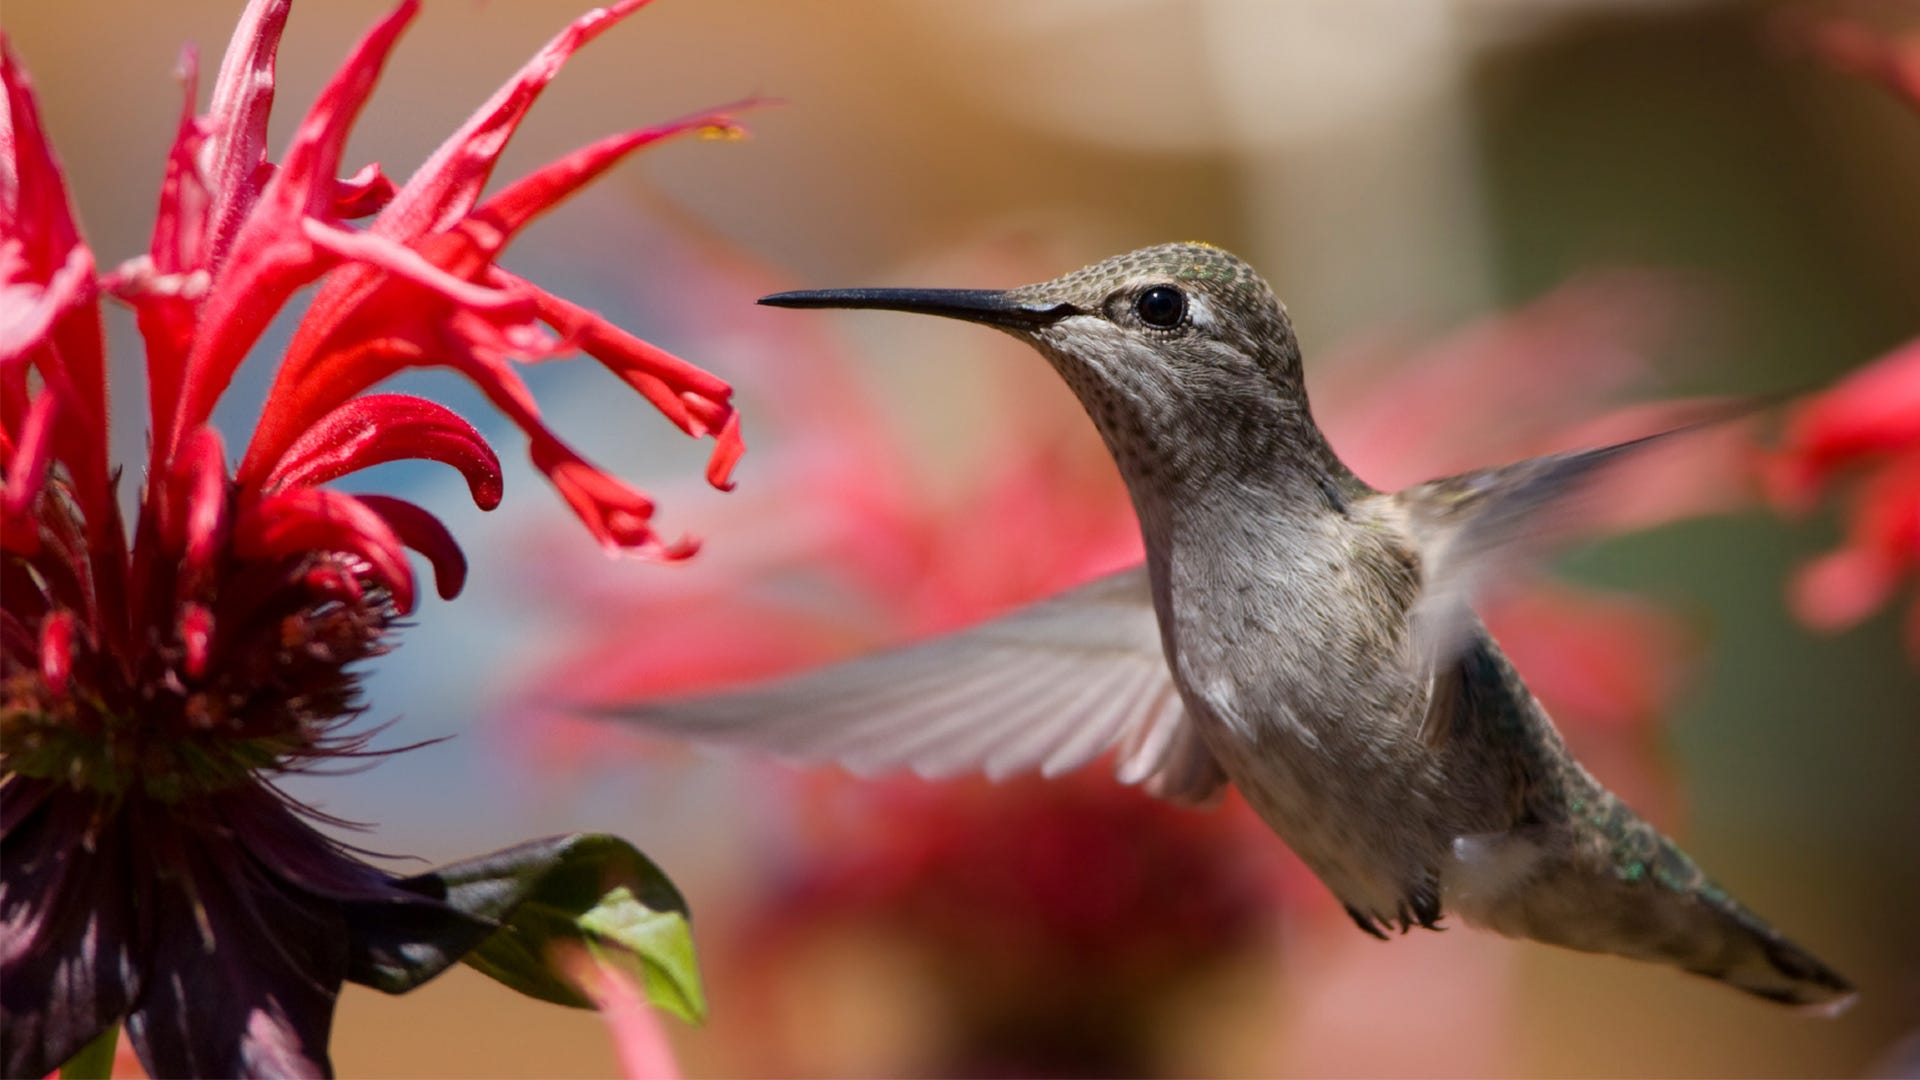 Are Hummingbirds Really Attracted to Red?